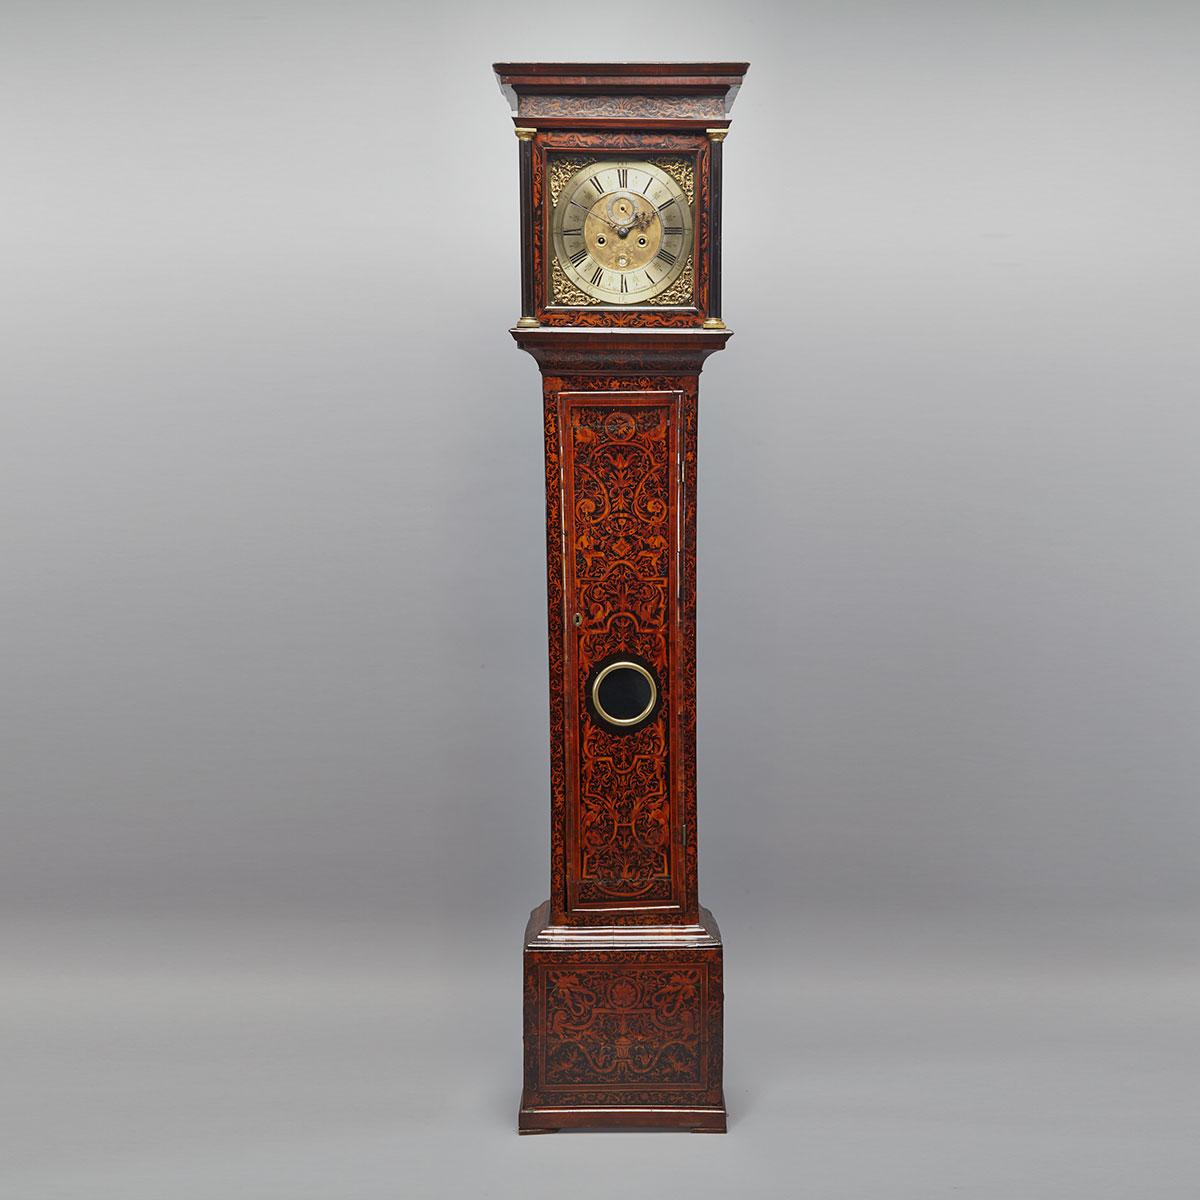 Charles II Olivewood, Ebony and Marquetry Tall Case Clock, Thomas Pare, London, late 17th century